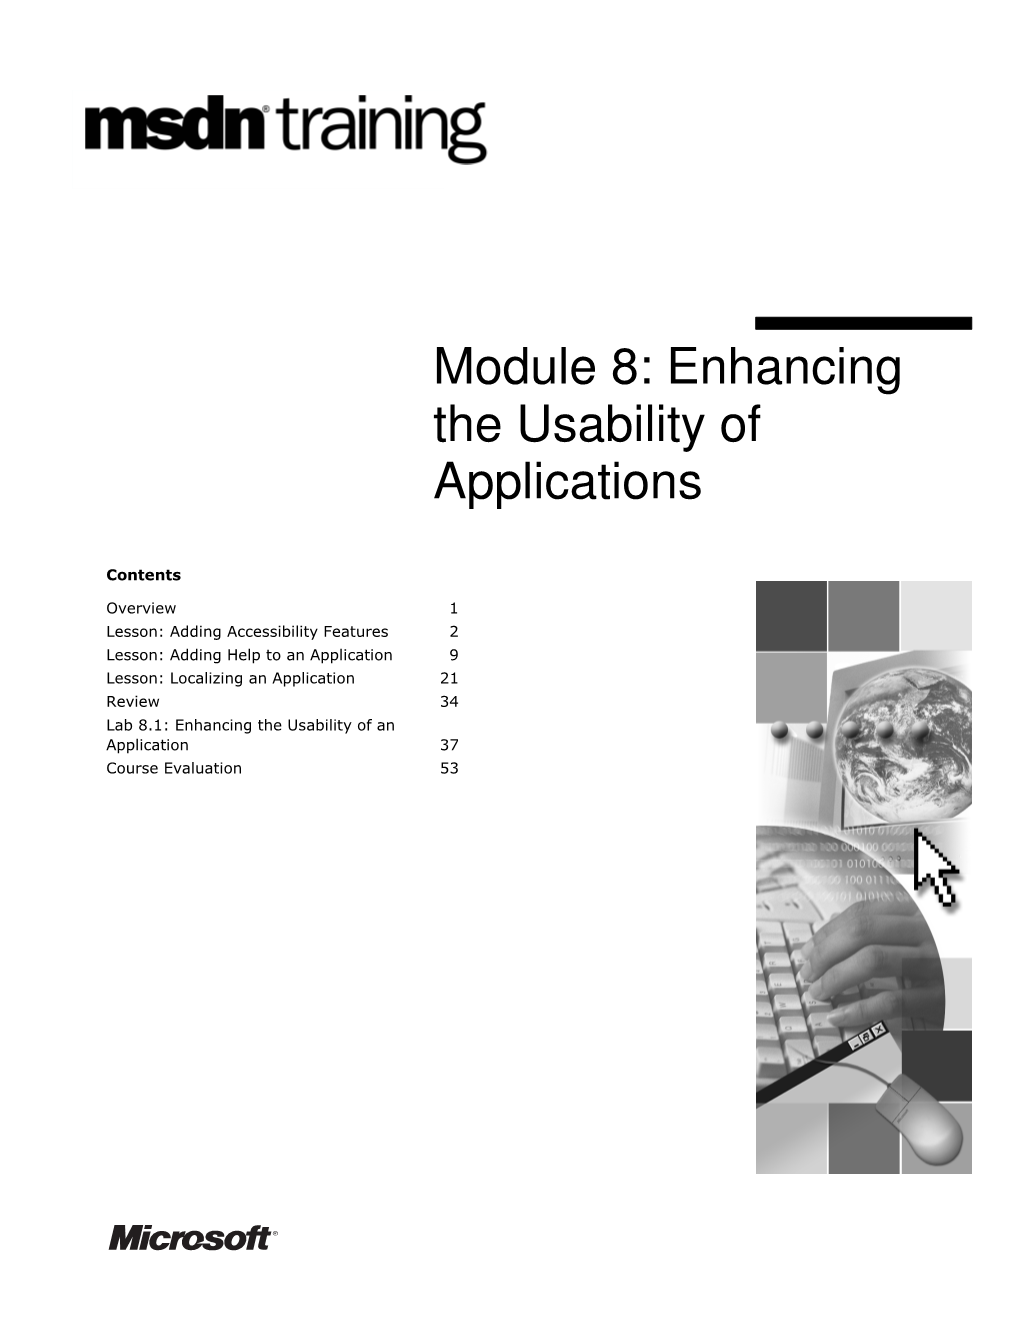 Module 8: Enhancing the Usability of Applications